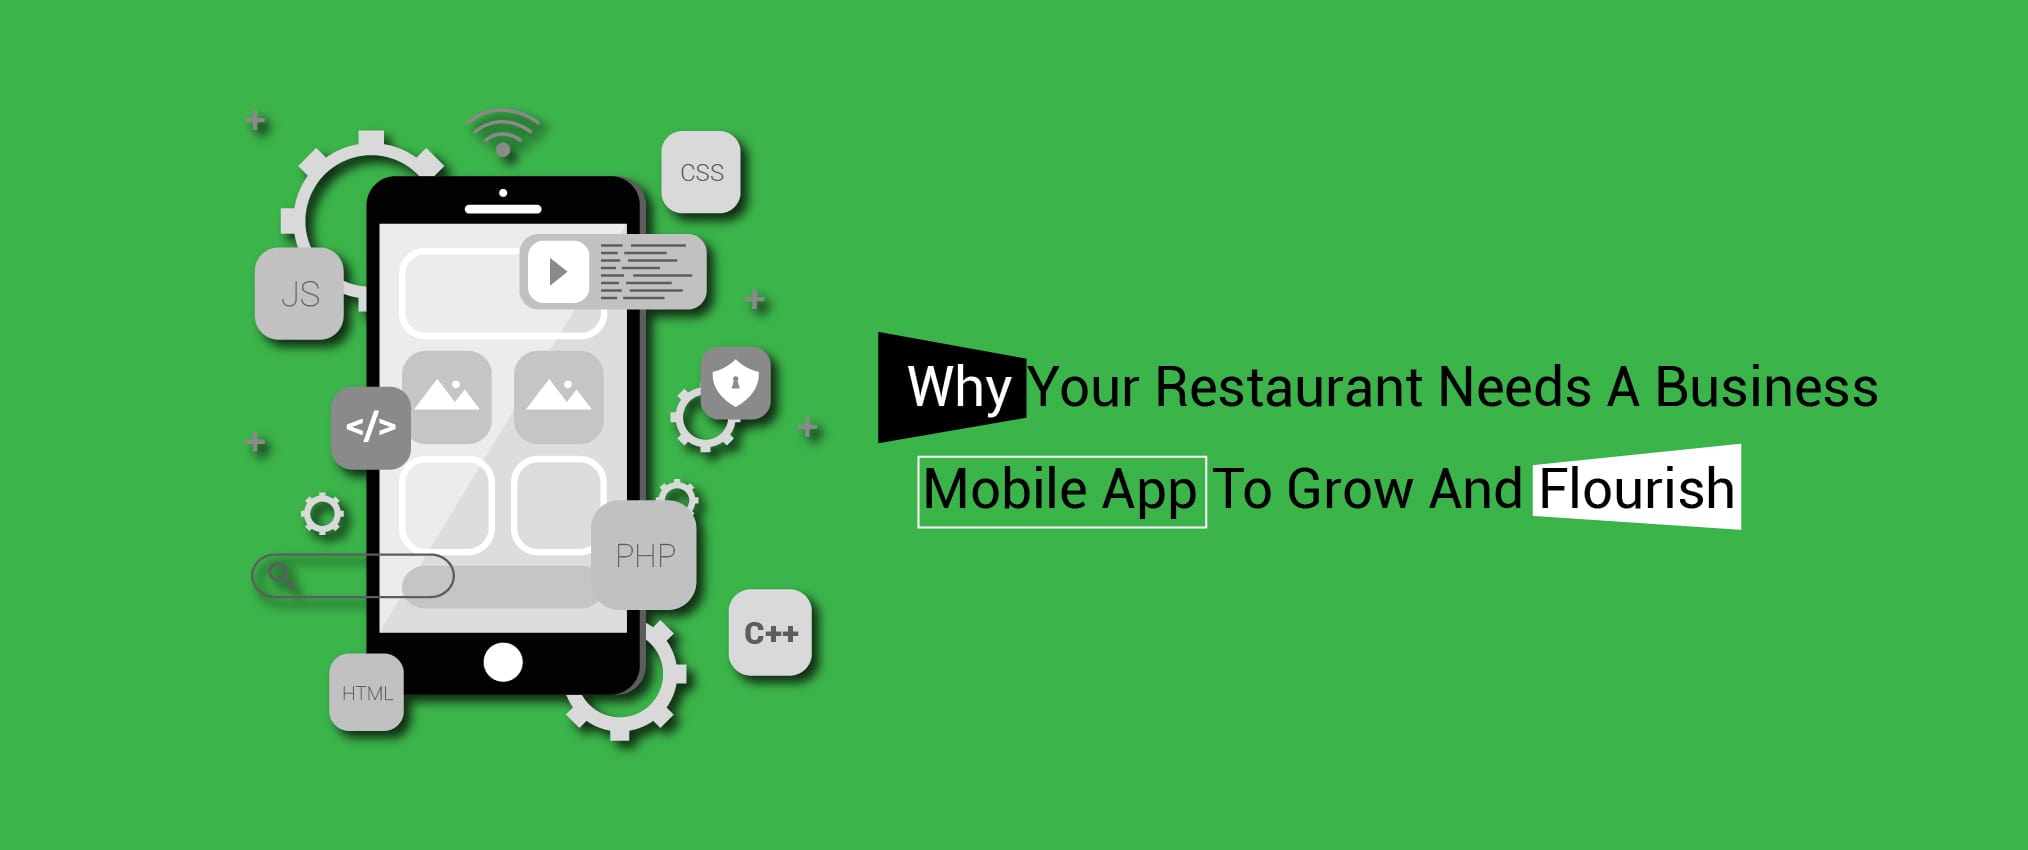 Why Your Restaurant Needs a Business Mobile App to Grow and Flourish?